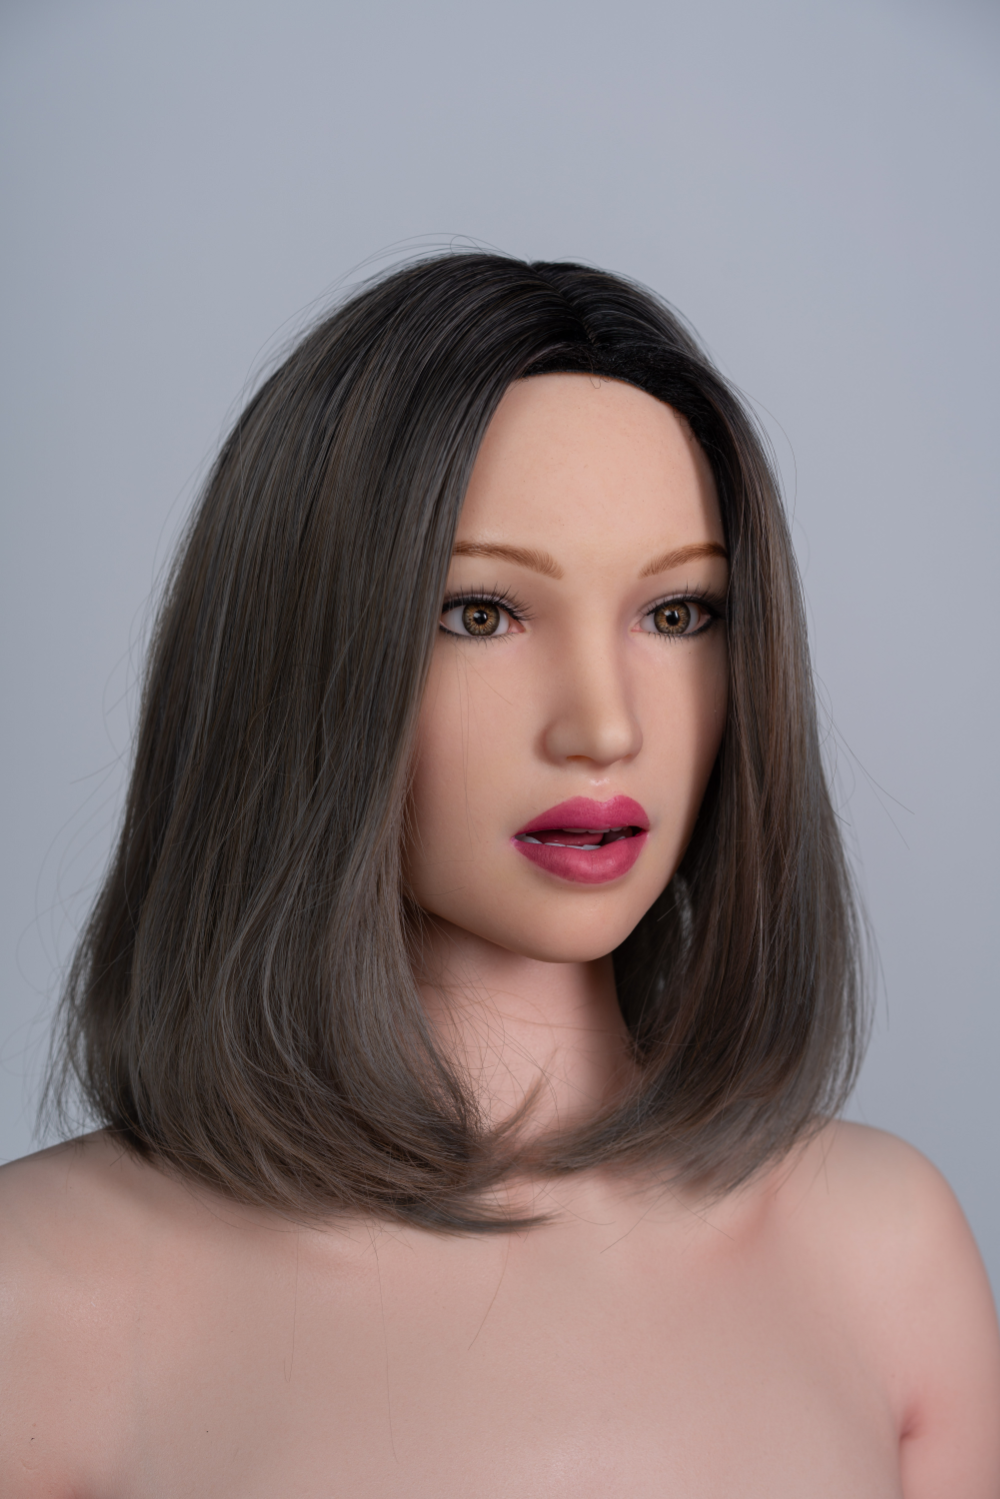 Zelex Doll Inspiration 175 cm E Silicone - Jennifer (Movable Jaws) | Buy Sex Dolls at DOLLS ACTUALLY